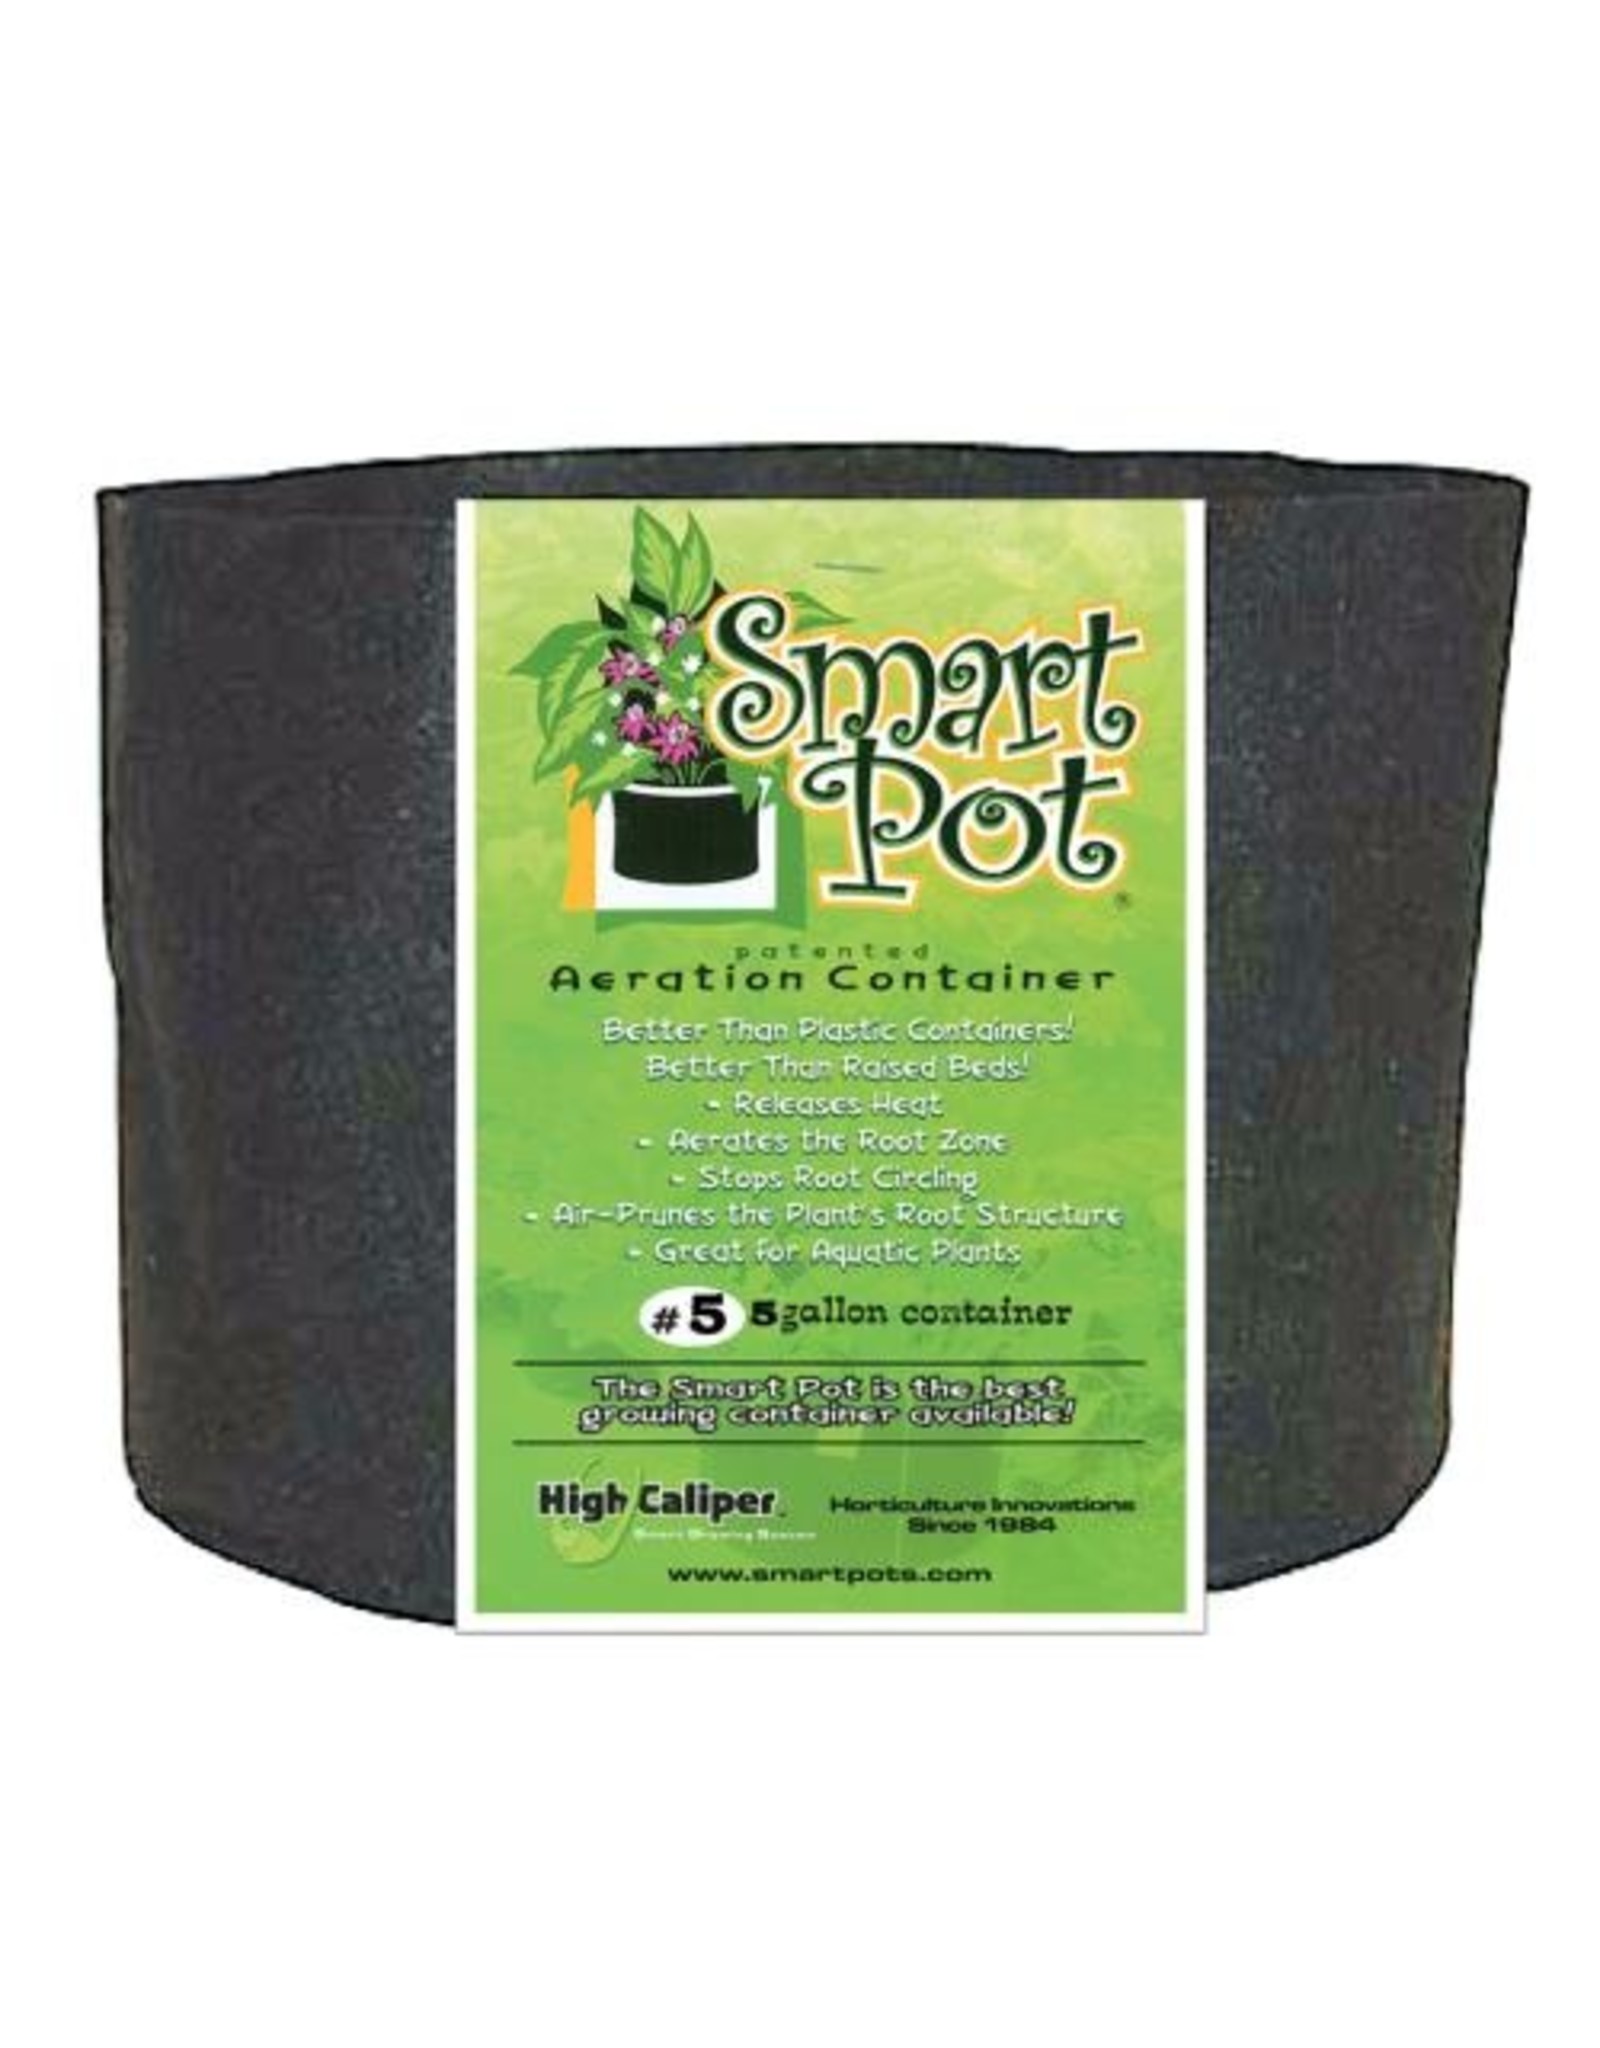 What plants grow well in 5-gallon fabric pots?